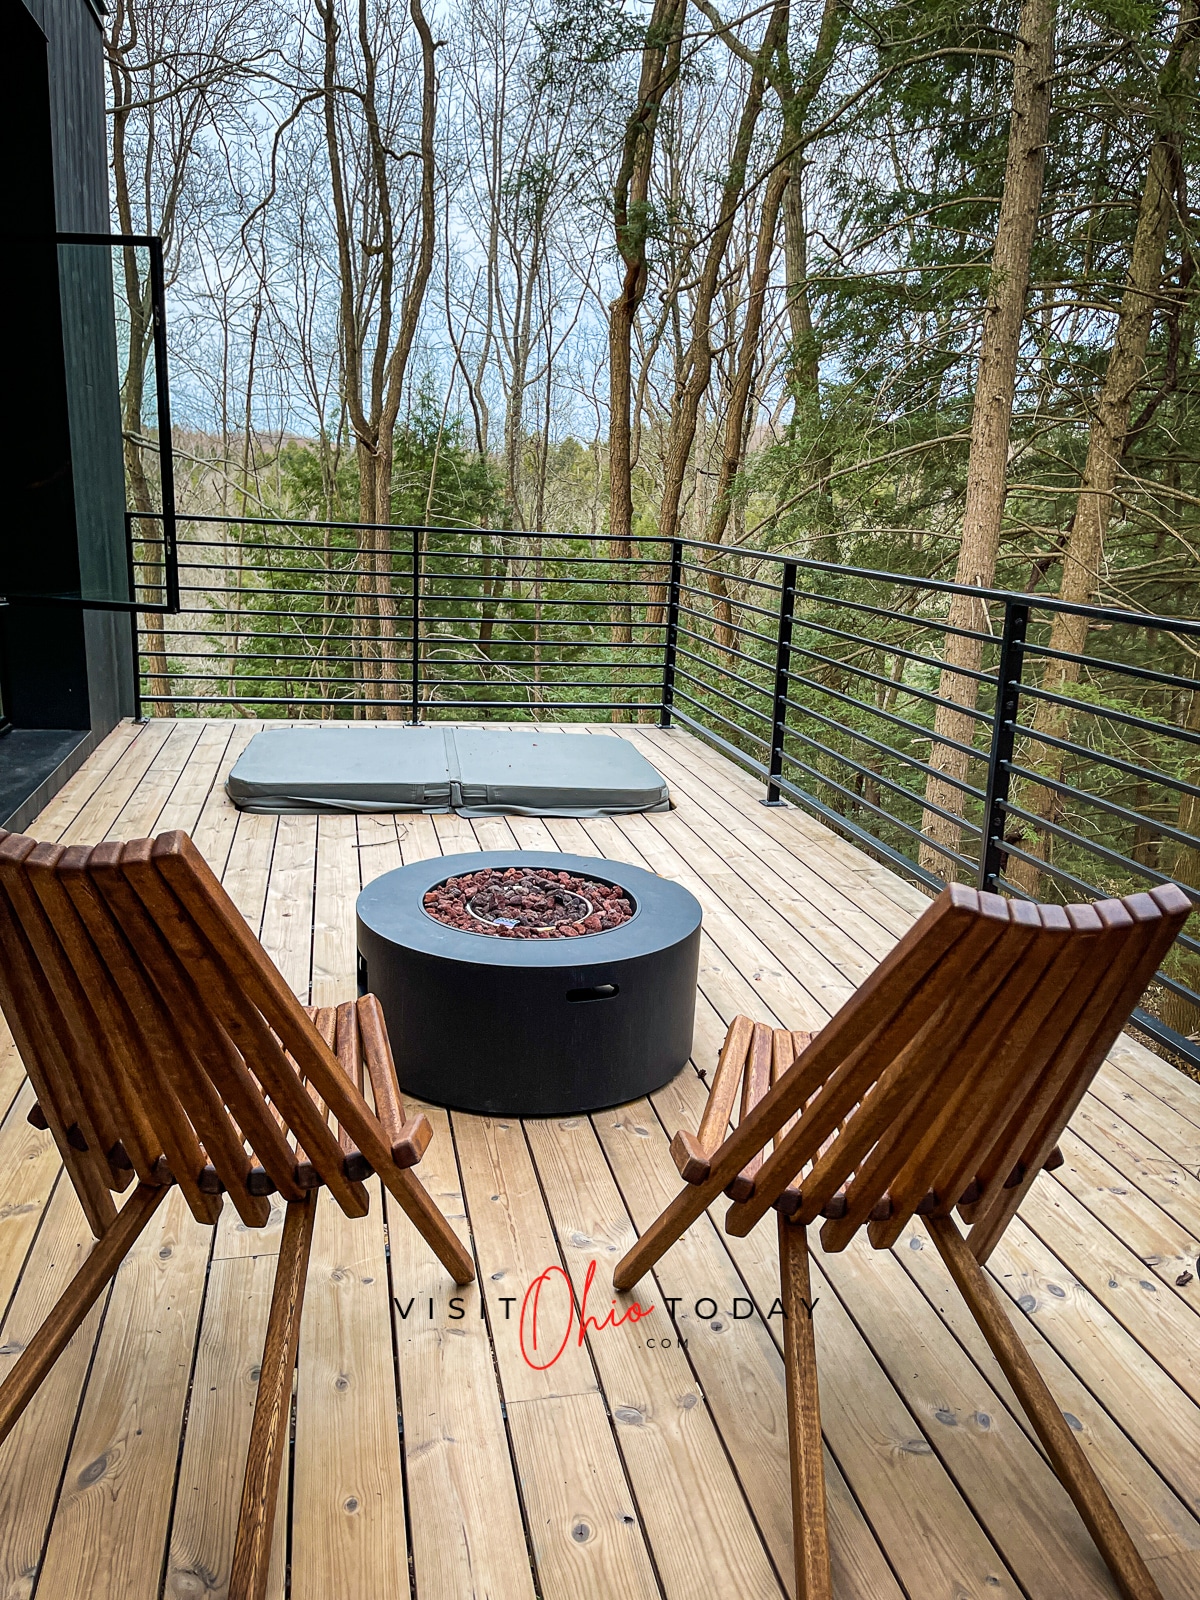 wooden deck with wire decking, sunken hottub with grey lid, gas fireplace and two wooden chairs Photo credit: Cindy Gordon of VisitOhioToday.com